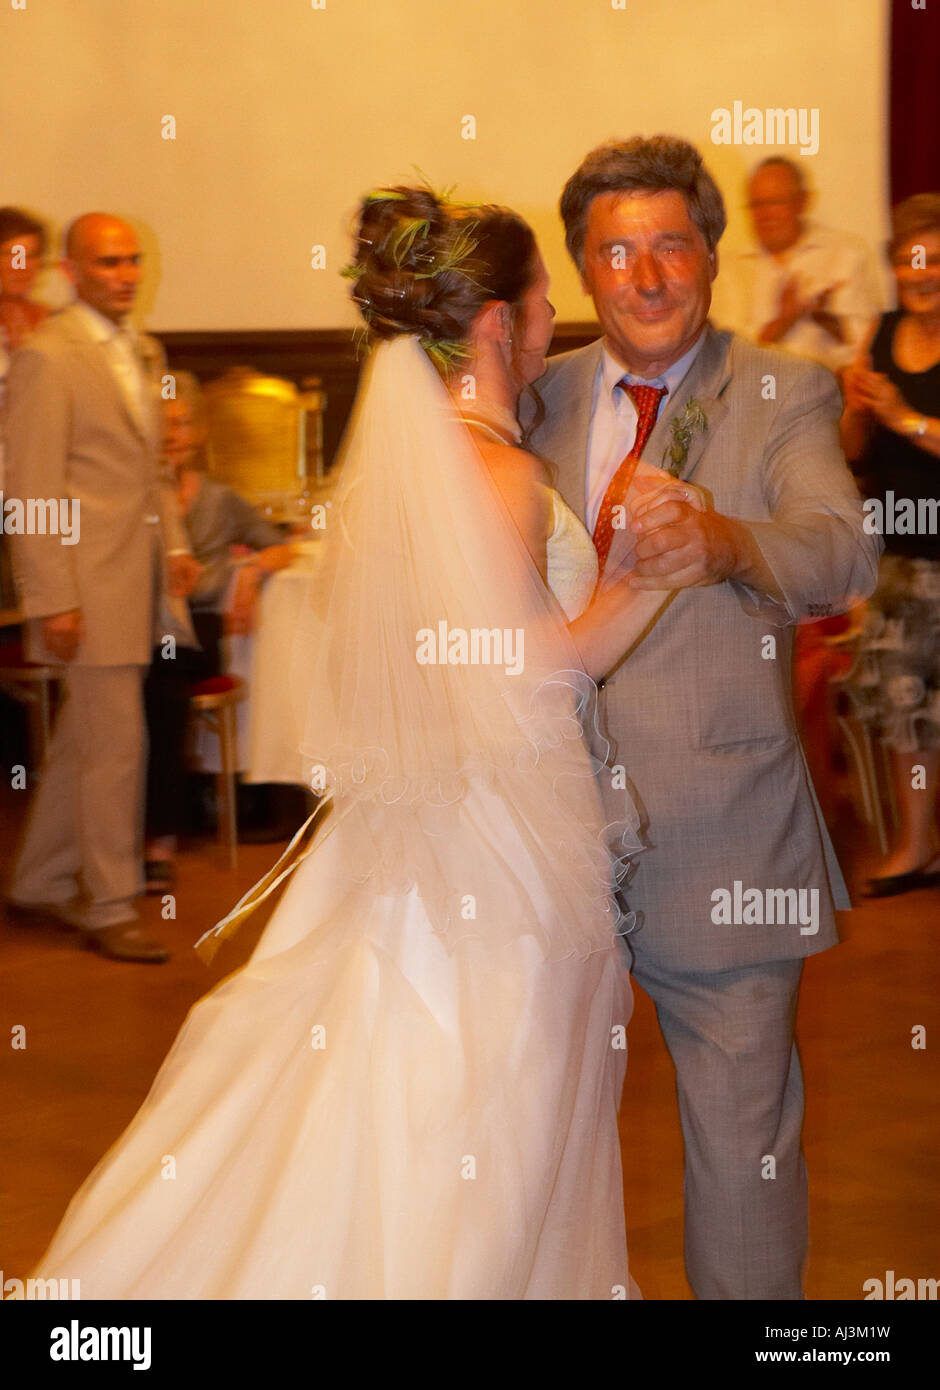 bride dancing with father Stock Photo